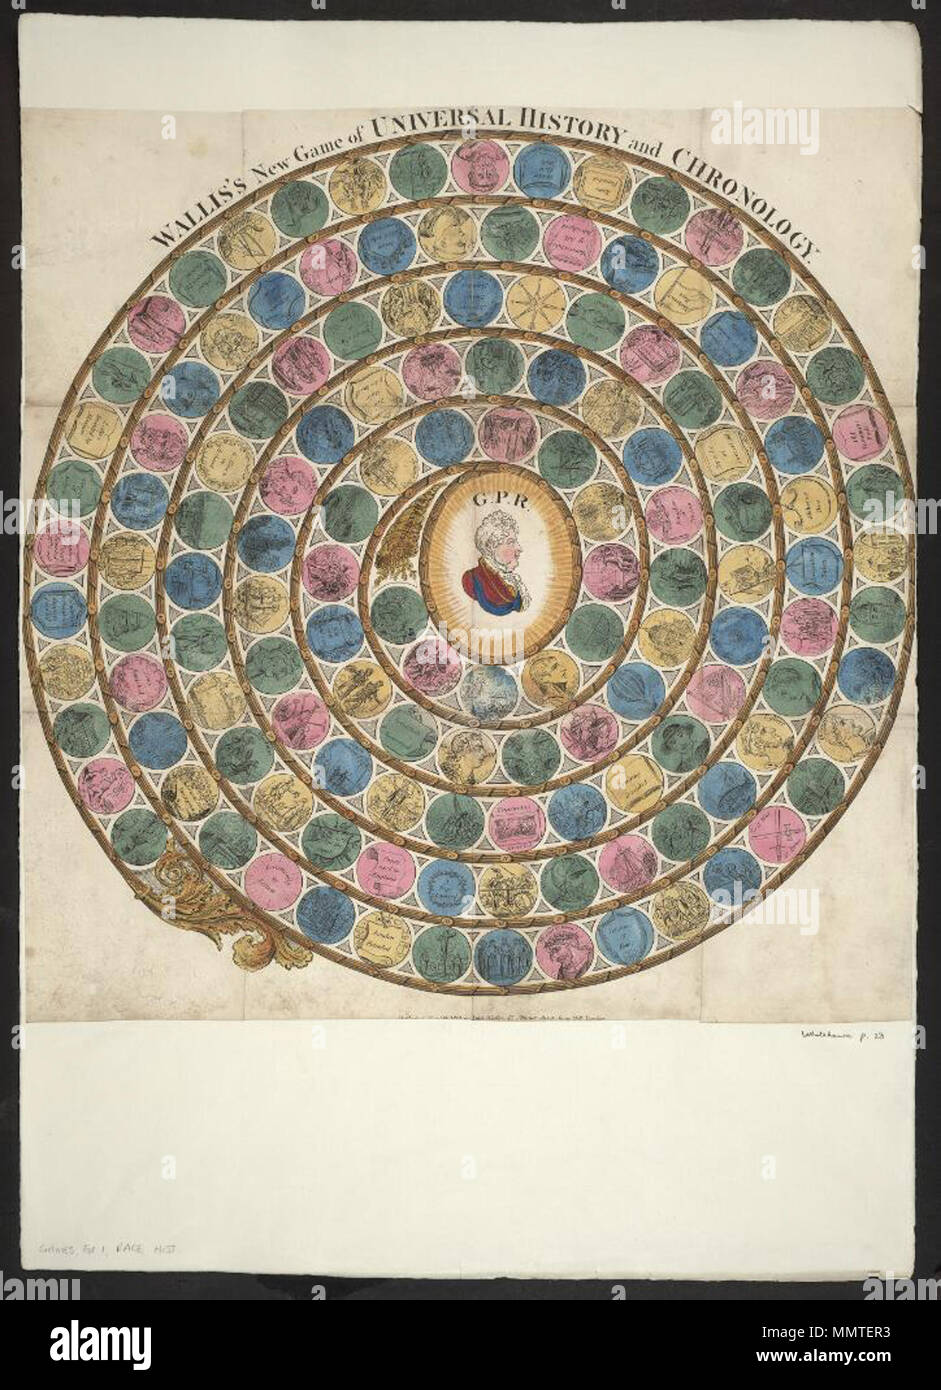 . Game of 1814 entitled Wallis's new game of universal history and chronology; 138 circles, many without text. Explained in book of rules (lacking); Babylonish & Assurian empires founded (5); Kingdom of Egypt founded 18th centy. (6); Kingdom of Sicyon (7); Letters invented by Memmon (8); Athens founded by Lecrops (11); Ten tribes in the Jews revolt (15); Money first made (17); Rome founded (18); Babylon taken (21); Thermopyla (23); Old Testament ends (24); Socrates (25); Alexander (27); Darius (28); Dionysus (29); Civil War at Rome (31); Caesar in Britain (32); Death of Caesar (33); Census at  Stock Photo